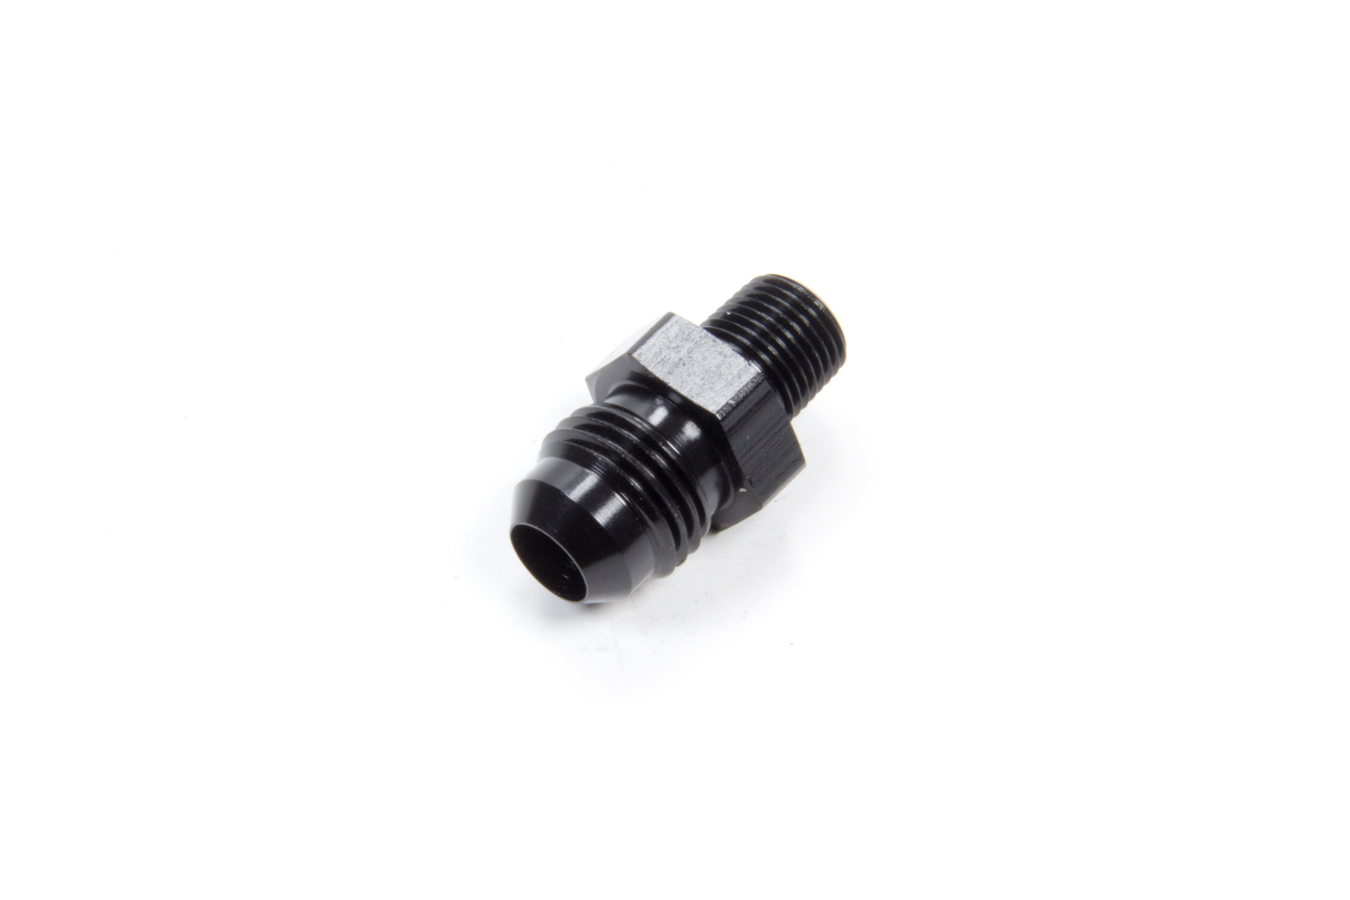 Aeroquip FCM5003 Fitting, Adapter, Straight, 6 AN Male to 1/8 in NPT Male, Aluminum, Black Anodized, Each